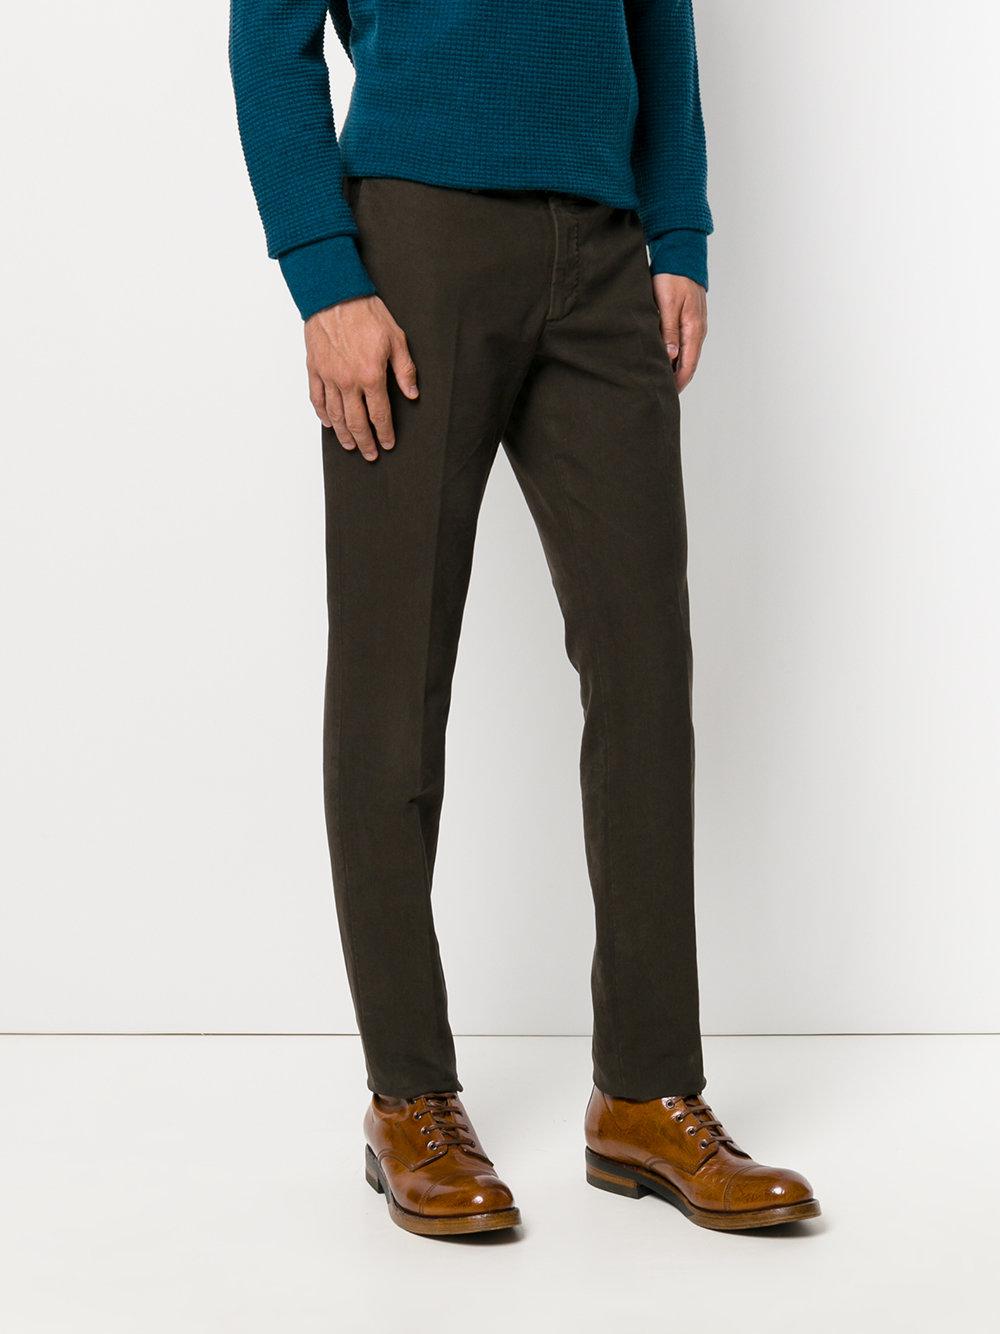 Incotex Cotton Classic Chinos in Brown for Men - Lyst